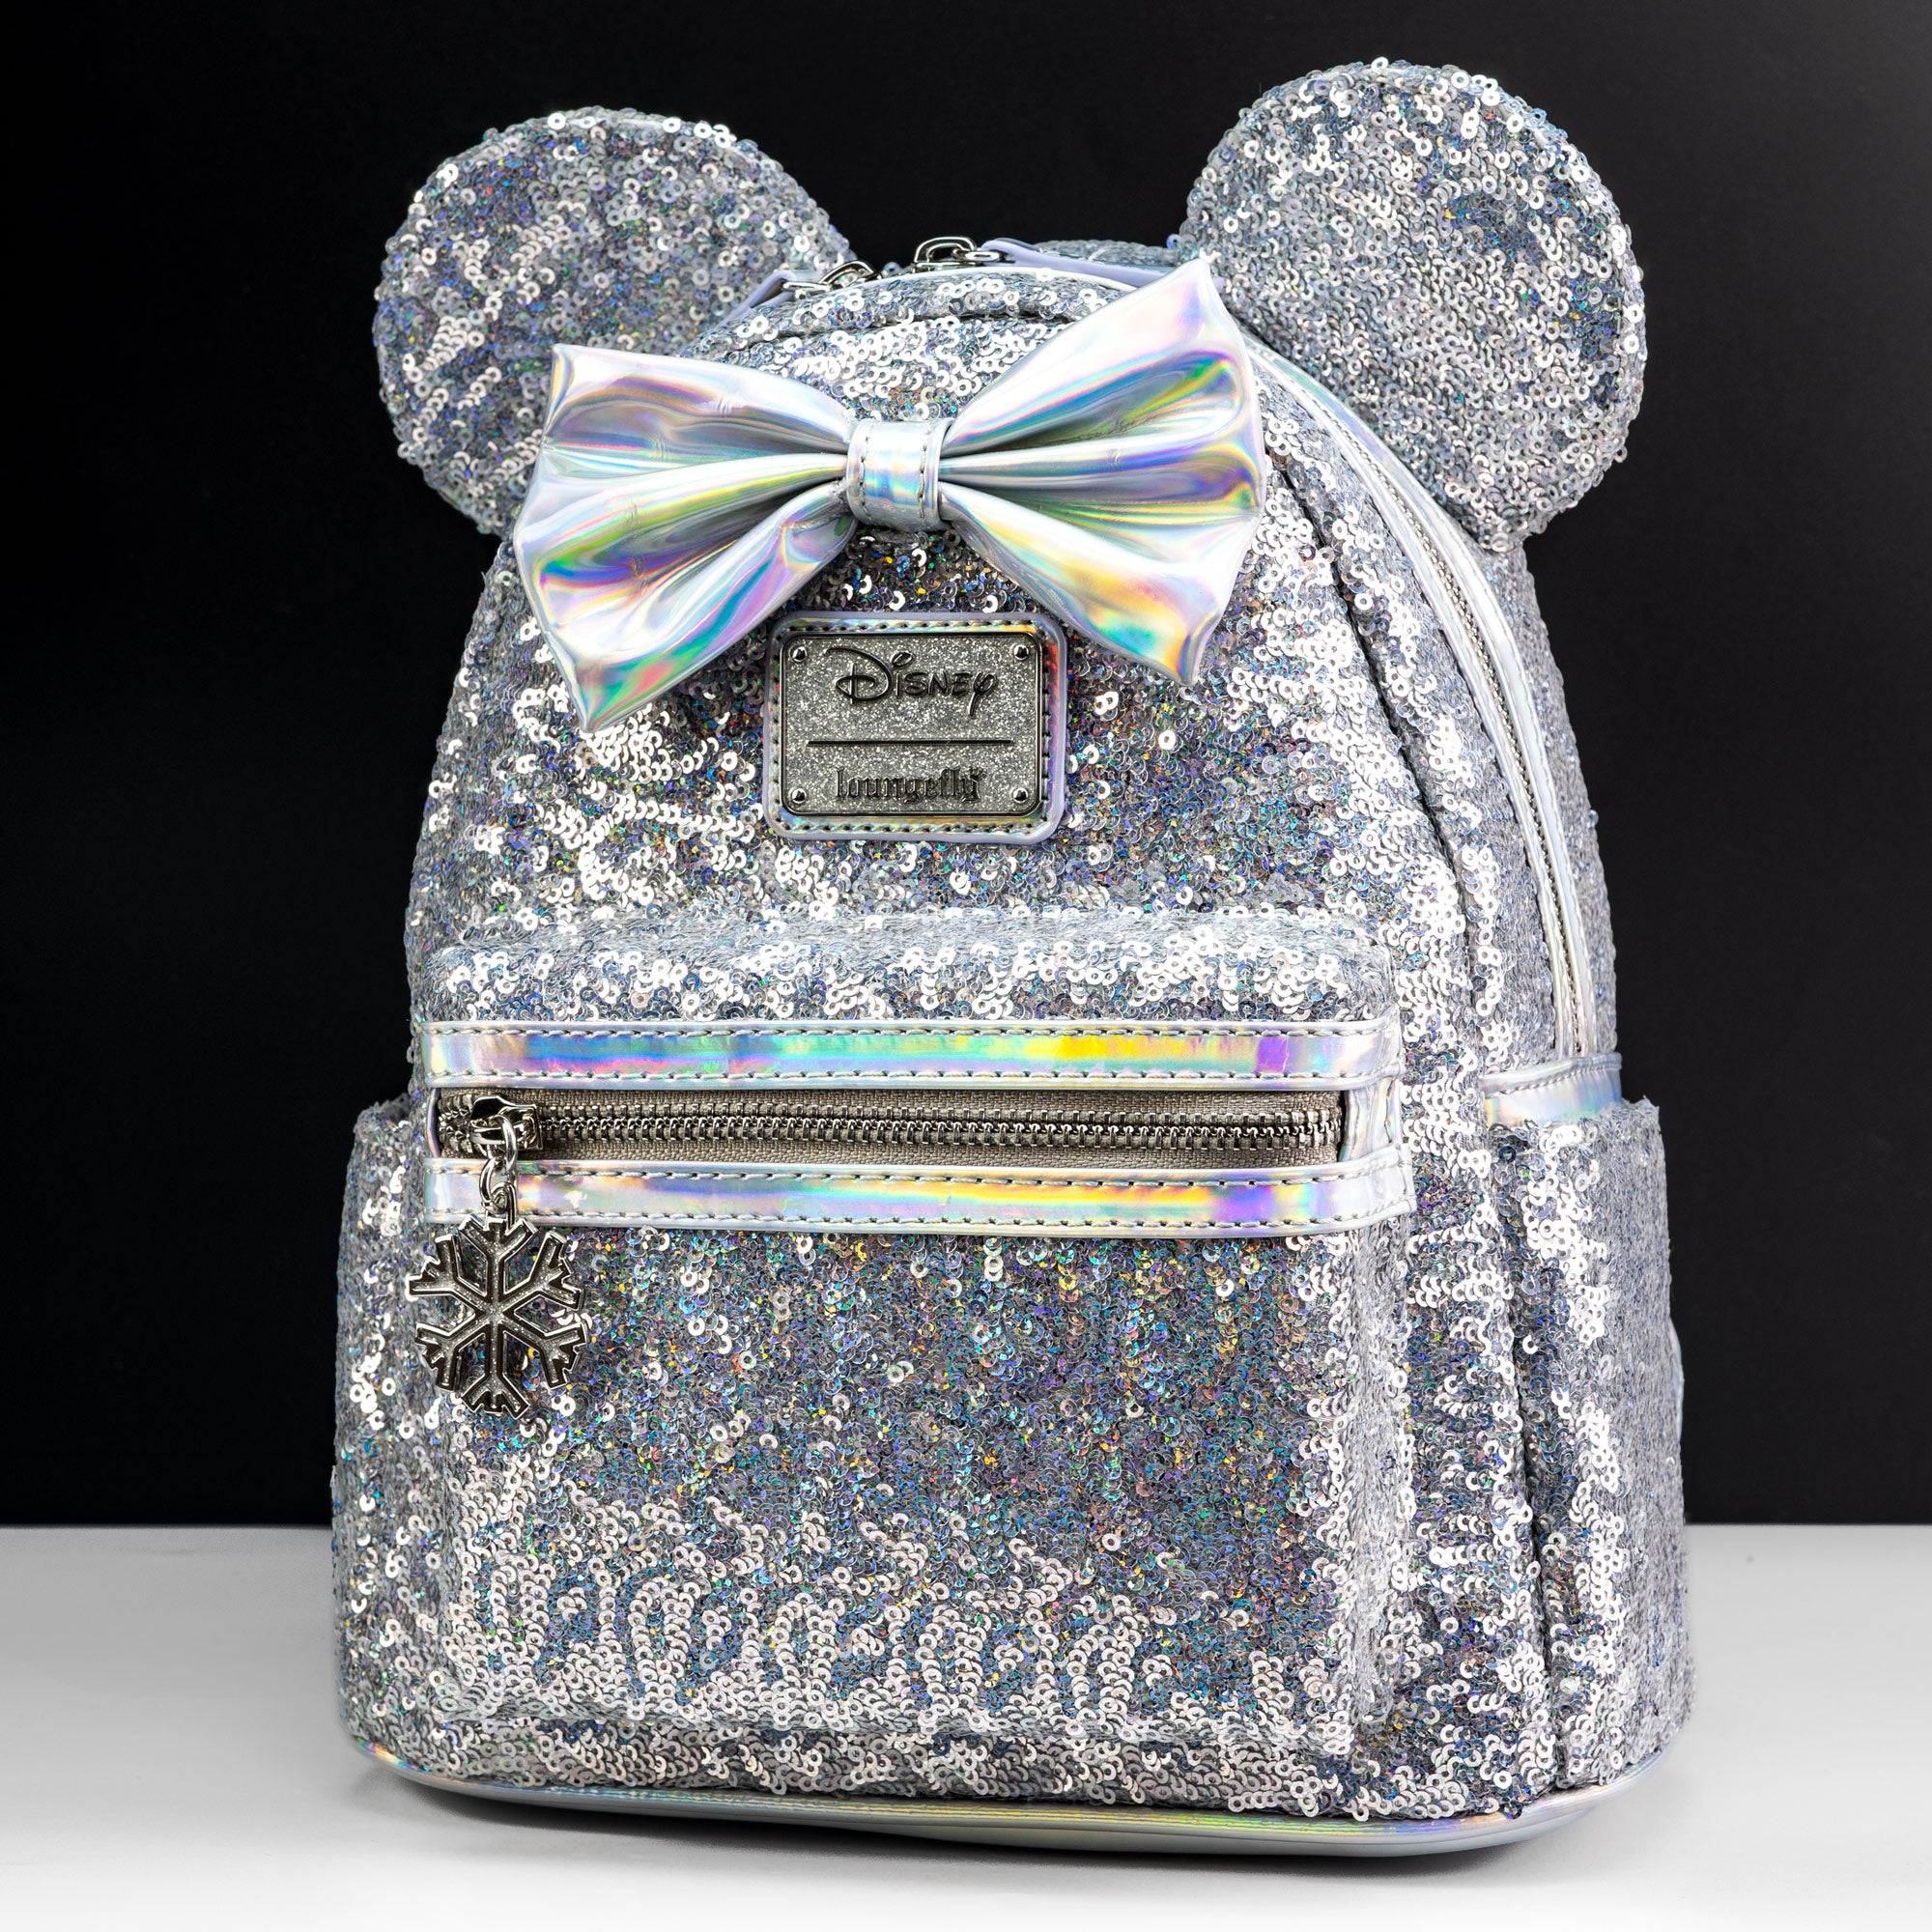 Loungefly x Disney Minnie Mouse Holographic Sequin Mini Backpack